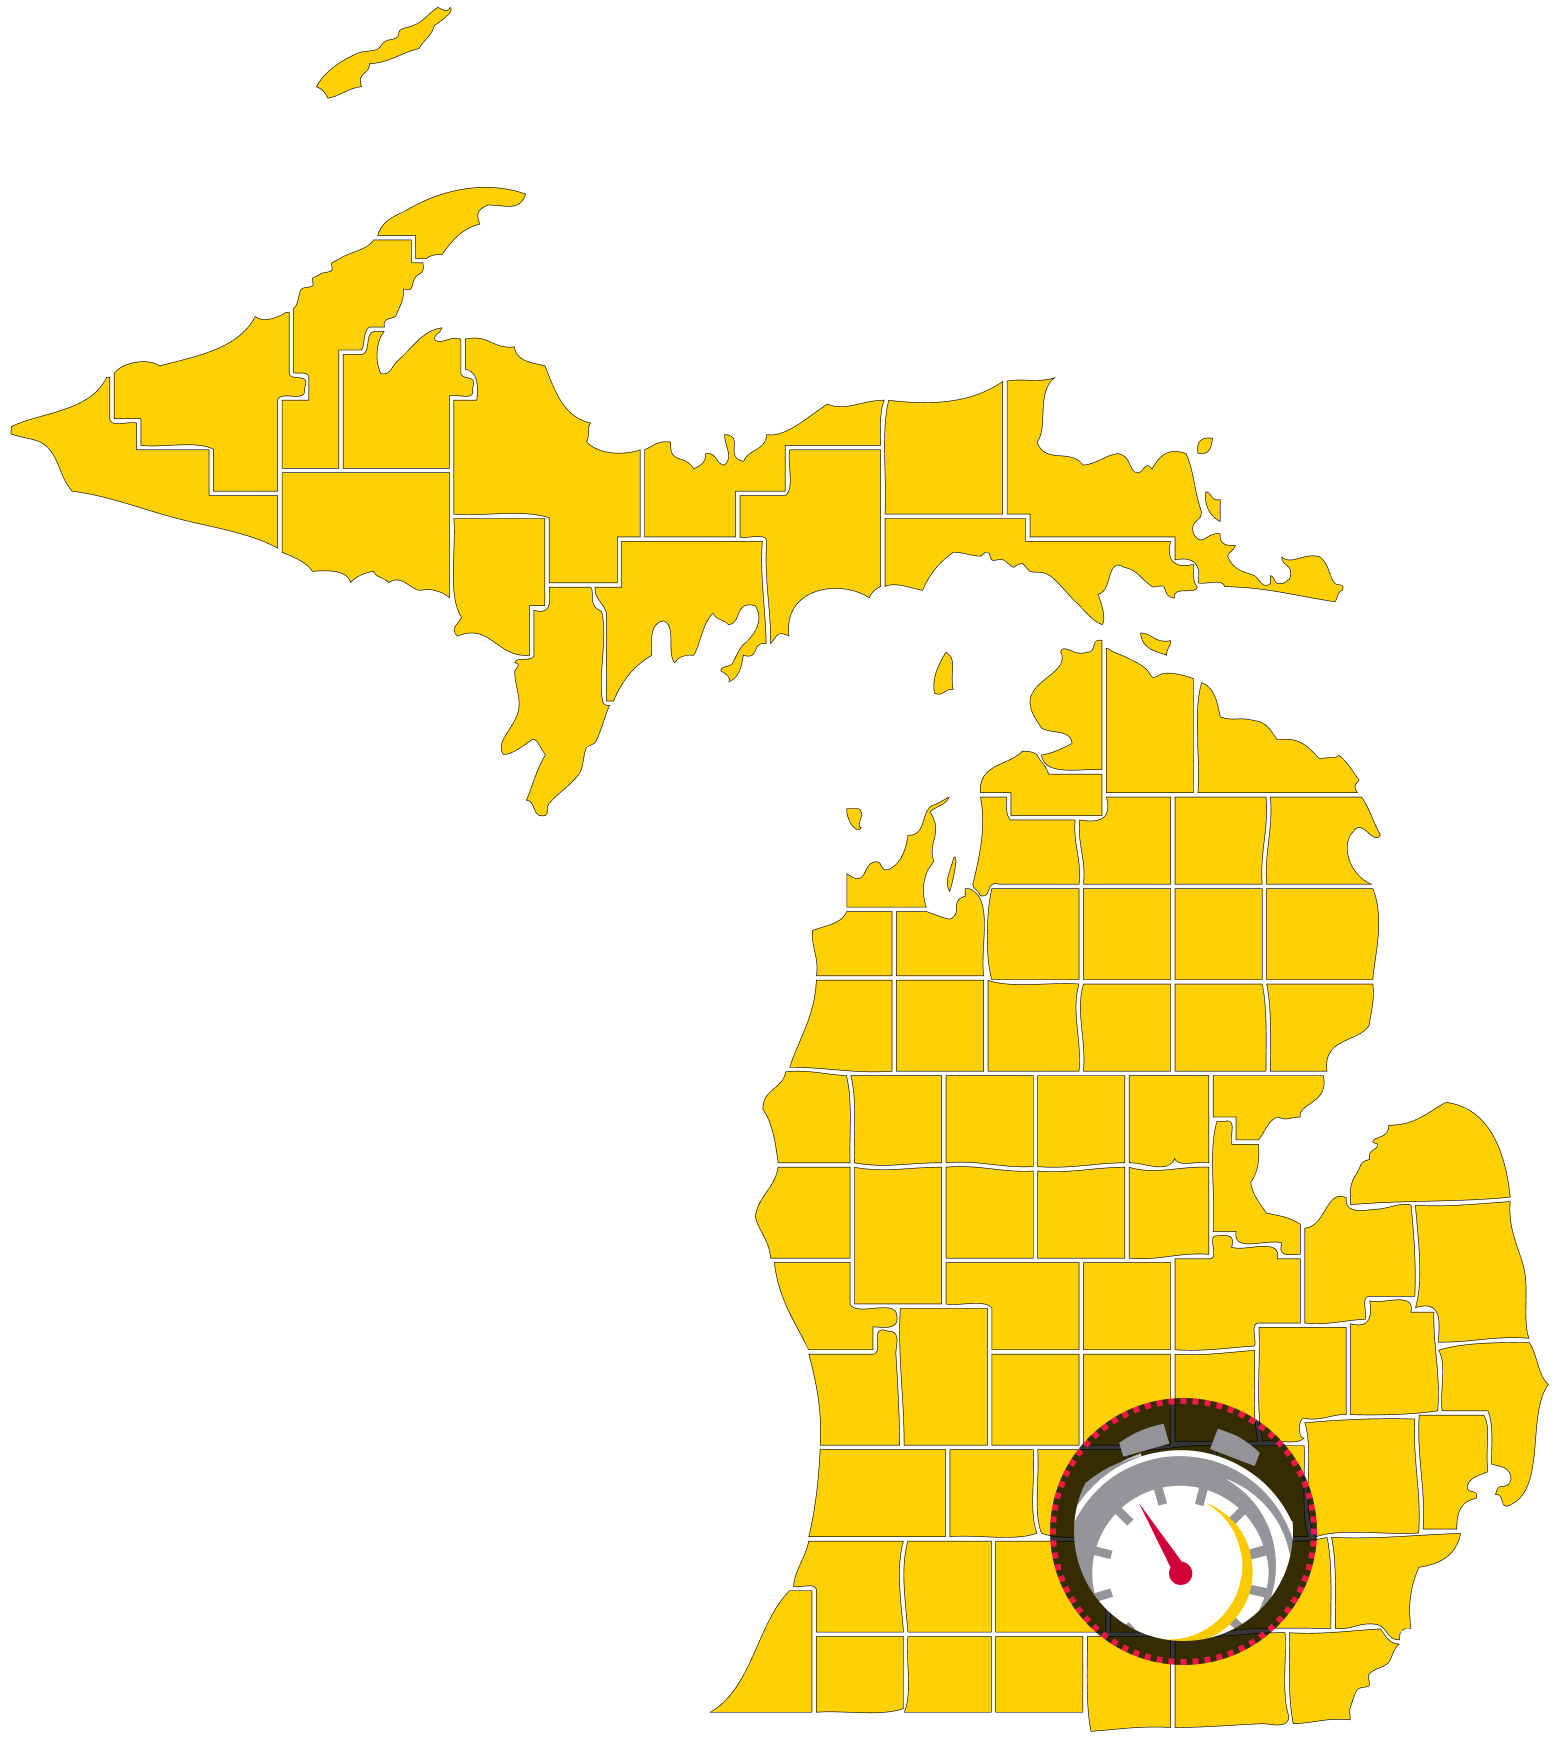 Map of Michigan with highlighted counties in the Eastern Time Zone, marked by heating and cooling symbols on the southeastern and southern parts of the state.